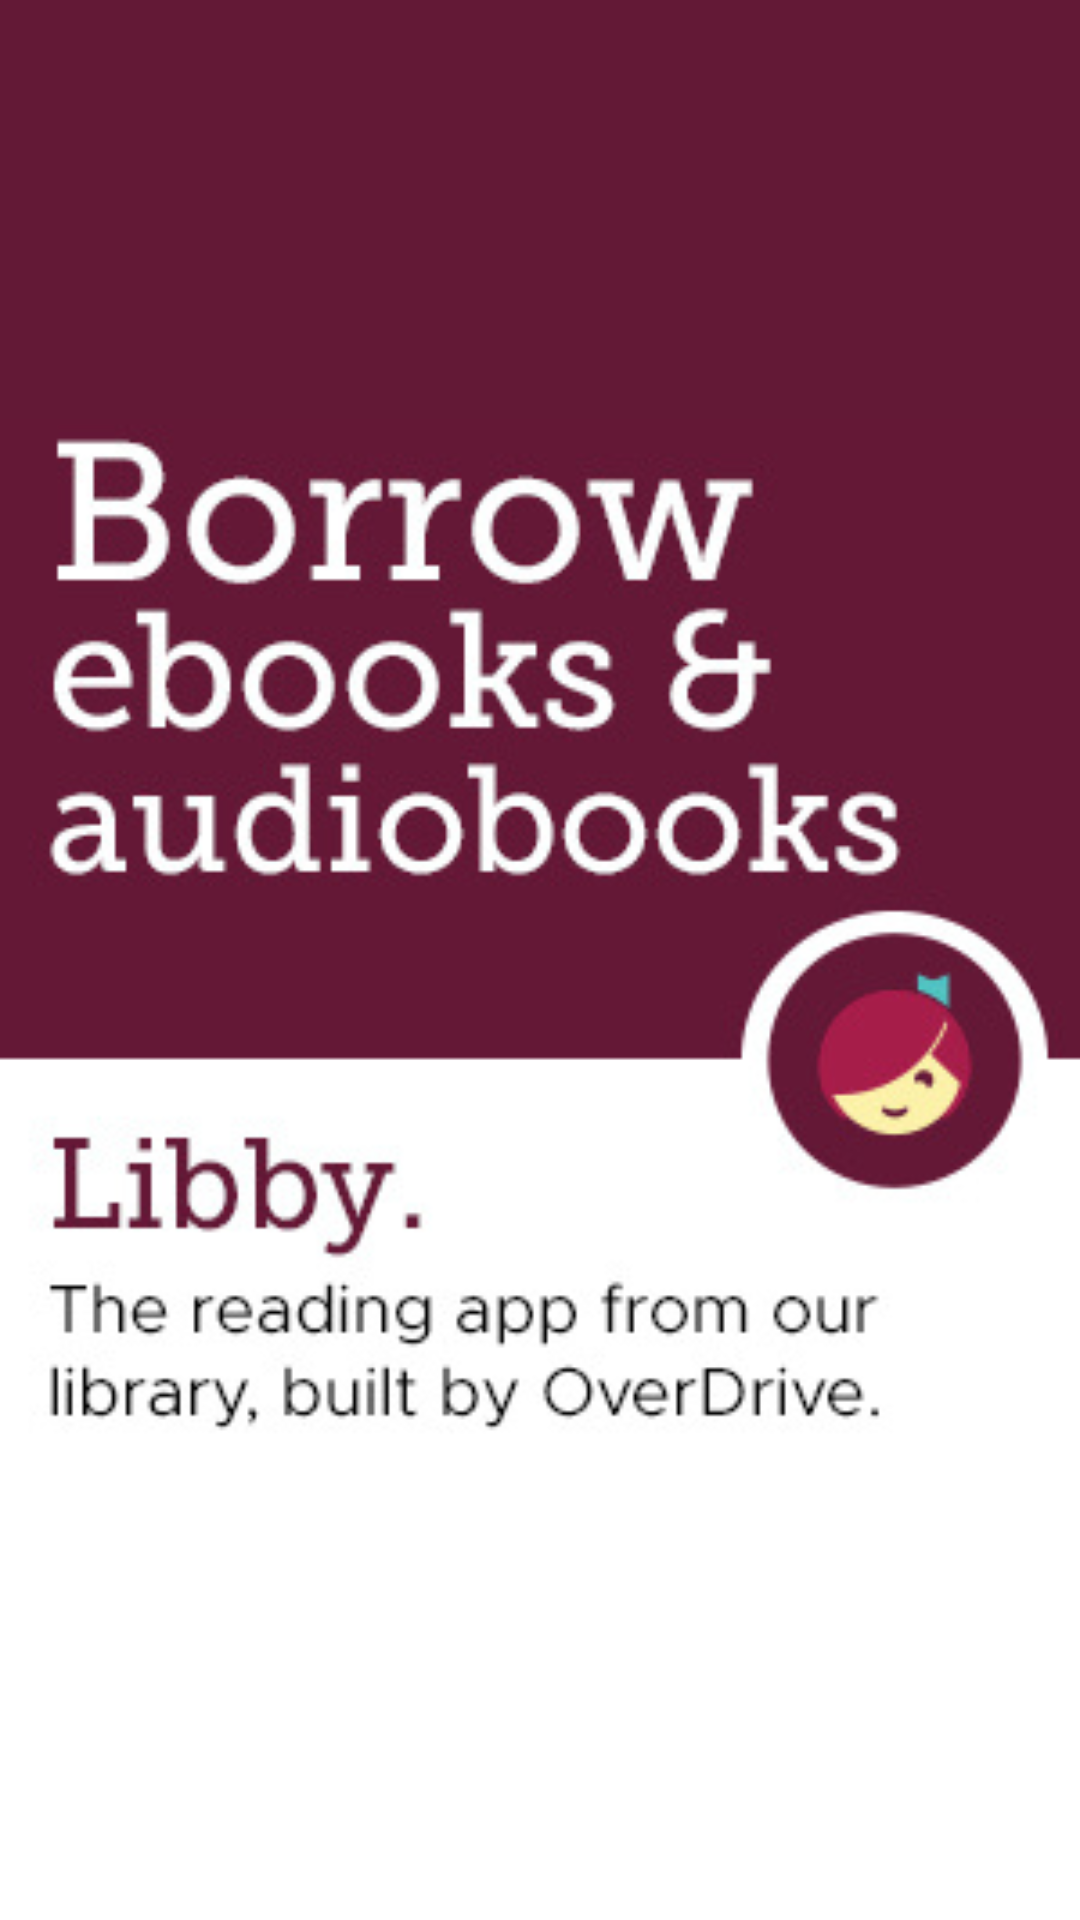 Borrow ebooks and audiobooks. Libby. The reading app from our library, built by OverDrive.